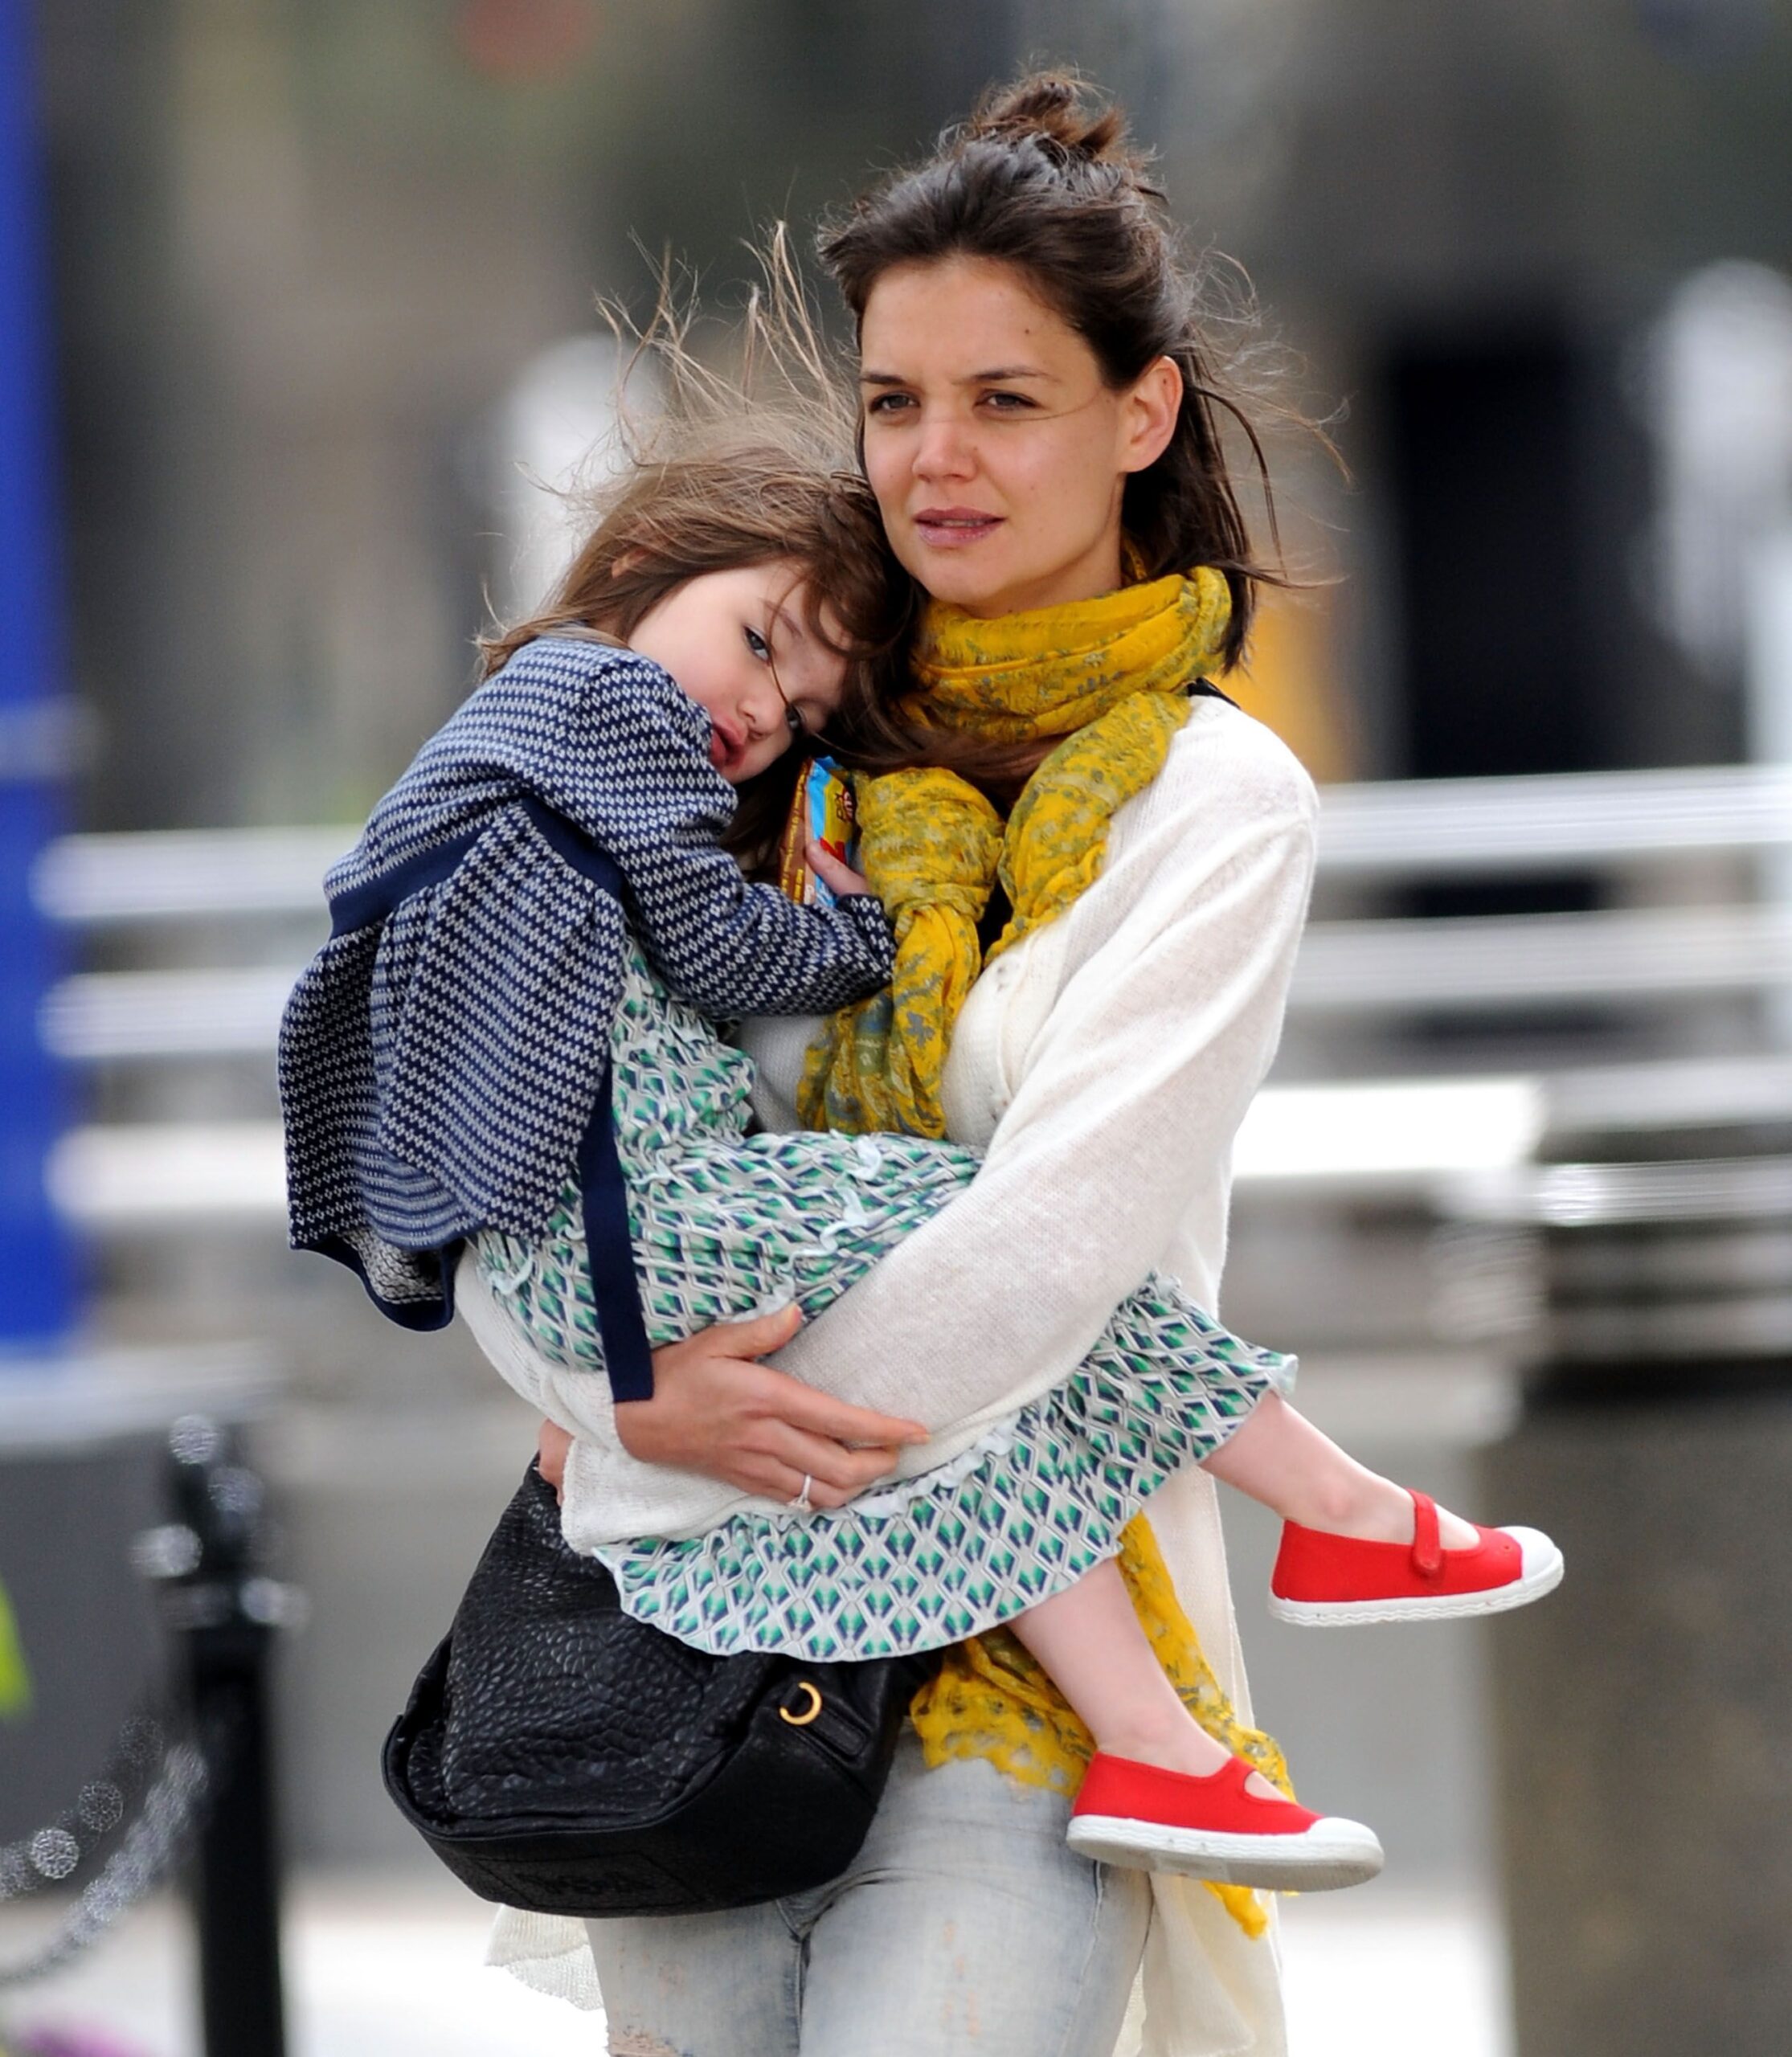 Katie Holmes and daughter Suri Cruise seen on the streets of Boston on October 10, 2009 in Boston, Massachusetts | Source: Getty Images 